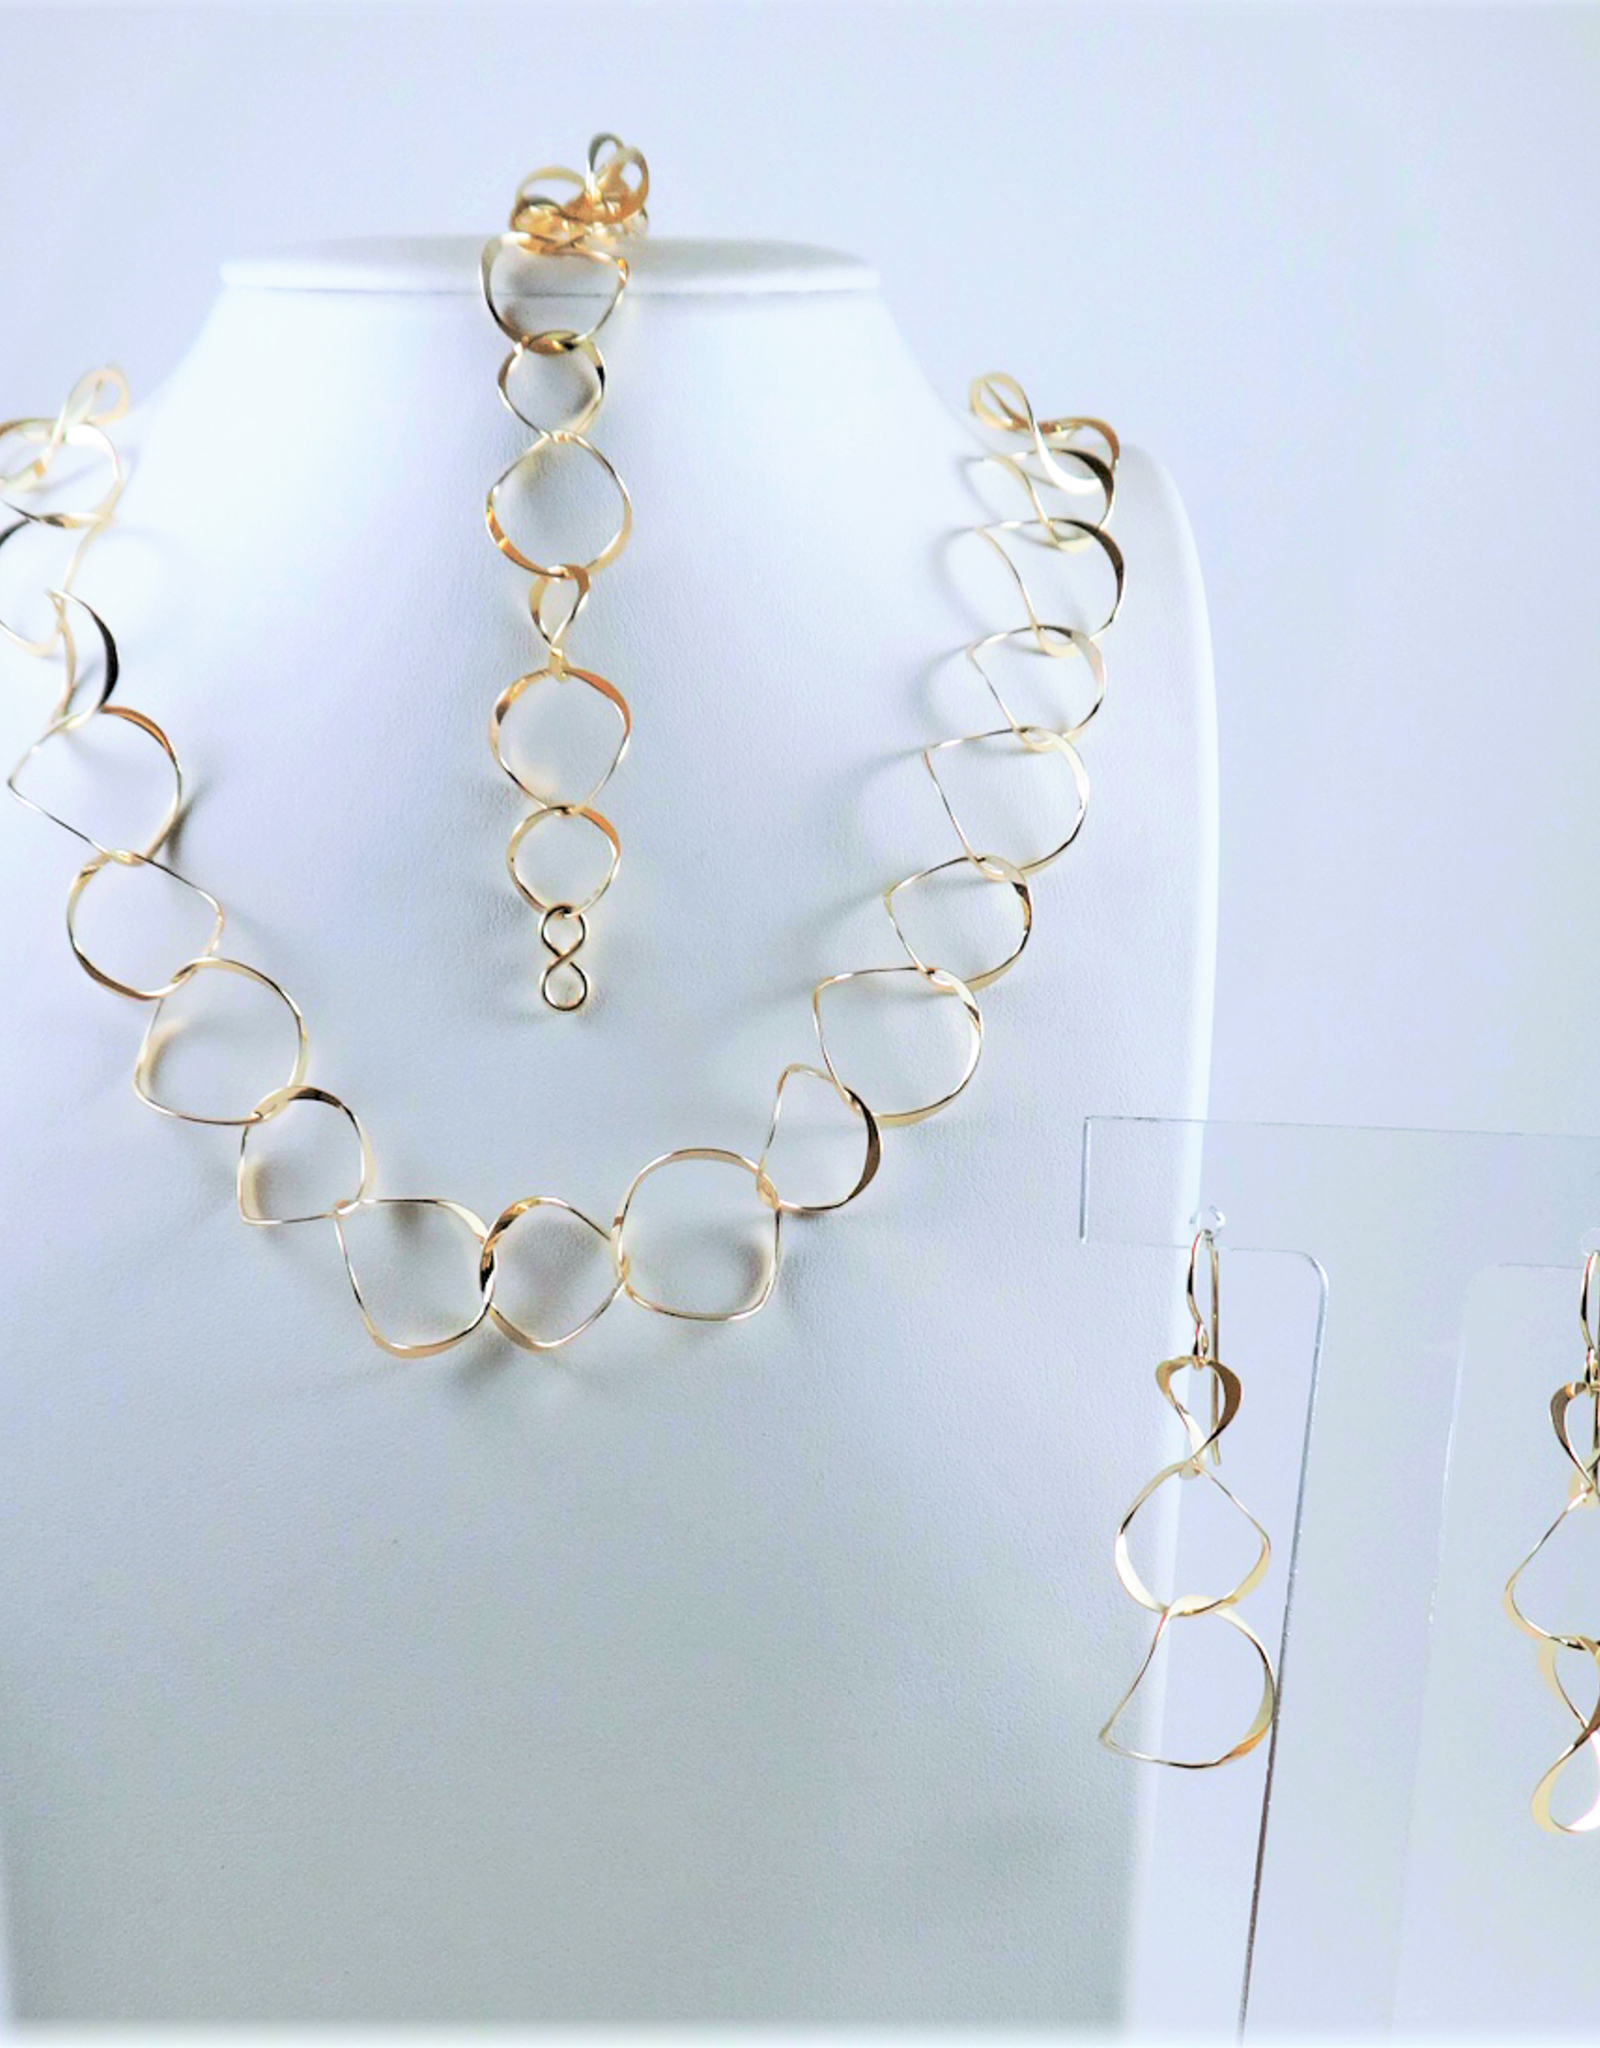 B&R Designs by Nilsson Gold-filled Wobble Necklace #NK4G 18"